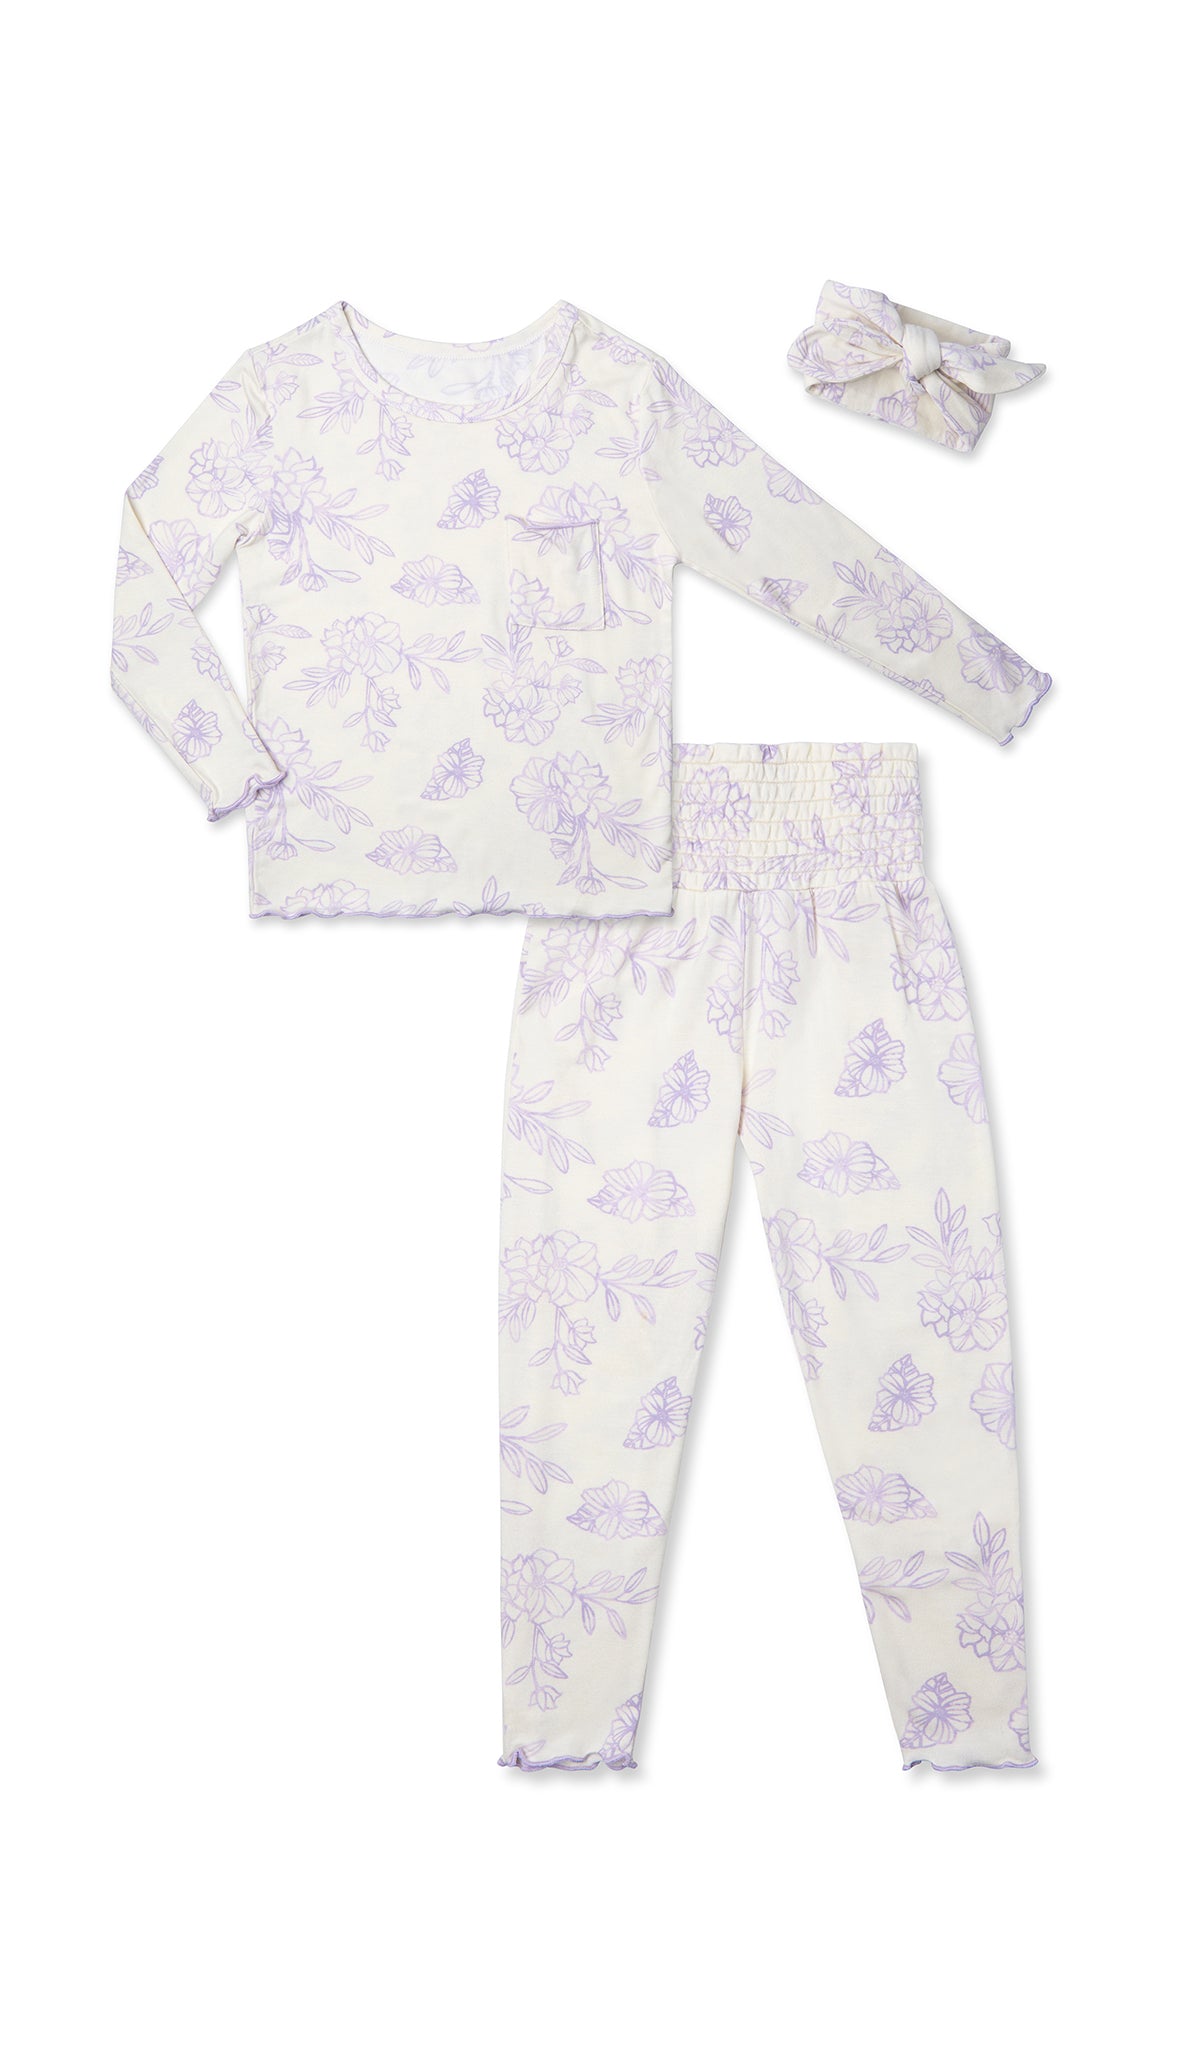 Bali Baby Kids 3-Piece Pant PJ. Long sleeve top with smocked waistband pant and matching headwrap. Lettuce trim detail on sleeve edge, top and pant hem.